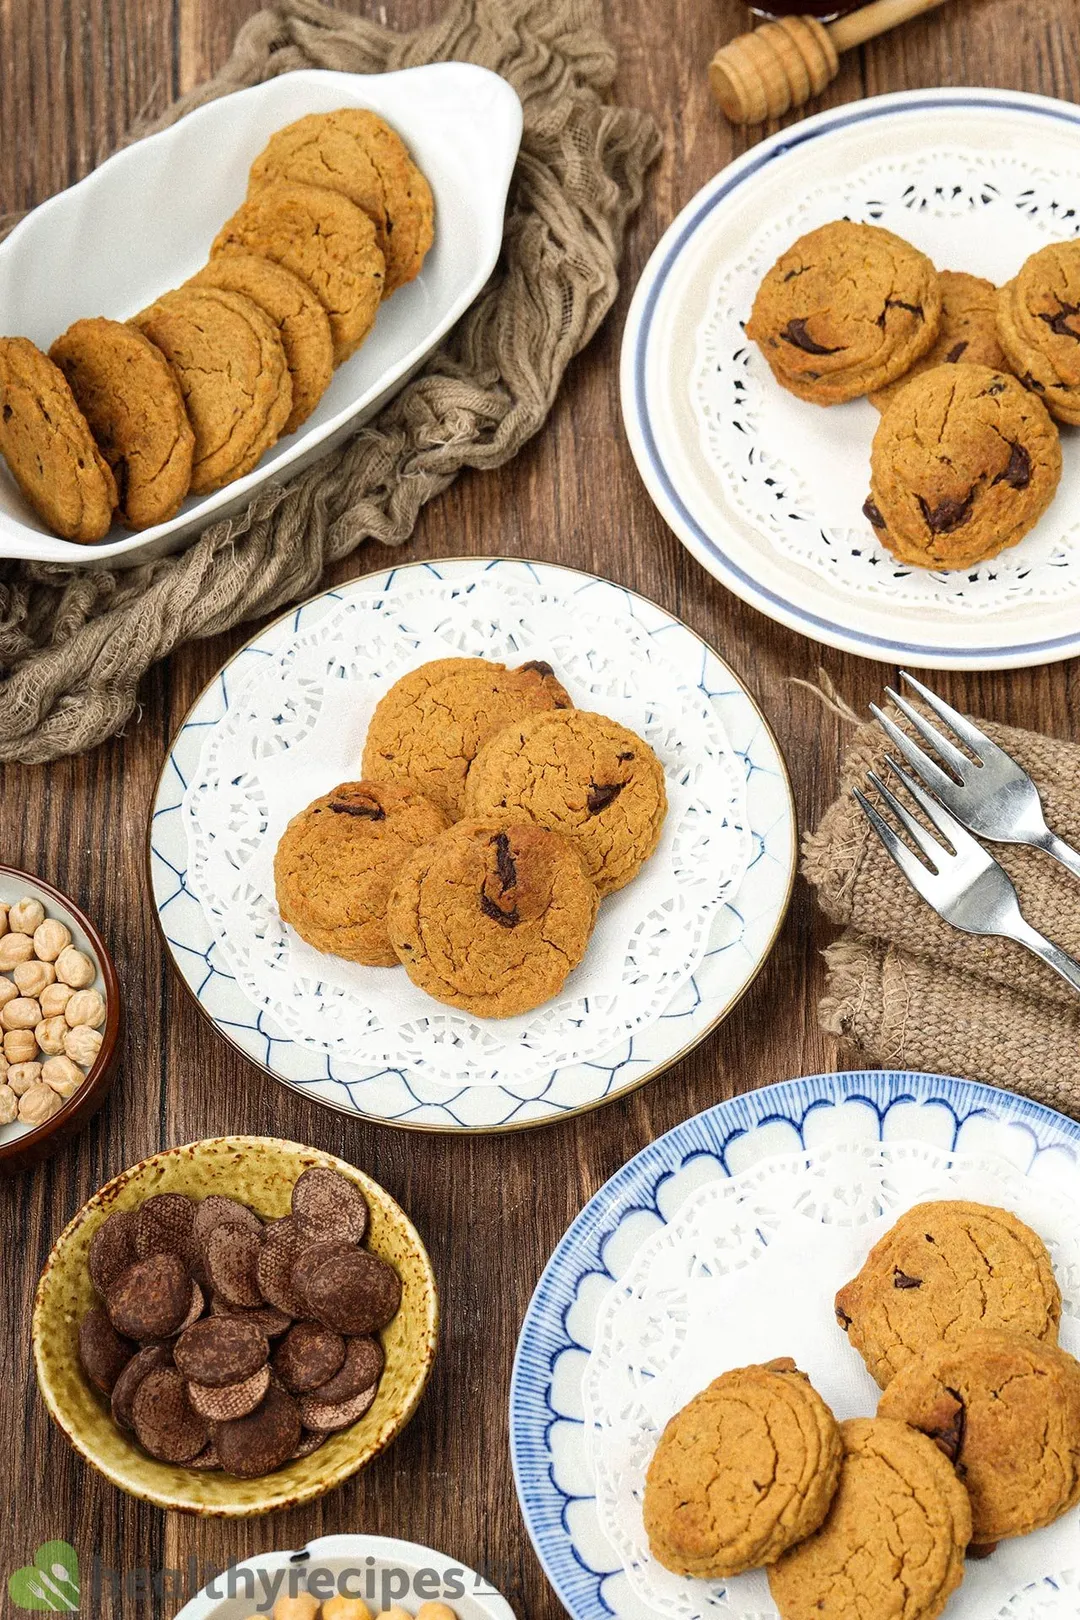 Plates of chickpea cookies laid on a wooden surface and surrounded by plates of chocolate chips, chickpeas, and forks.